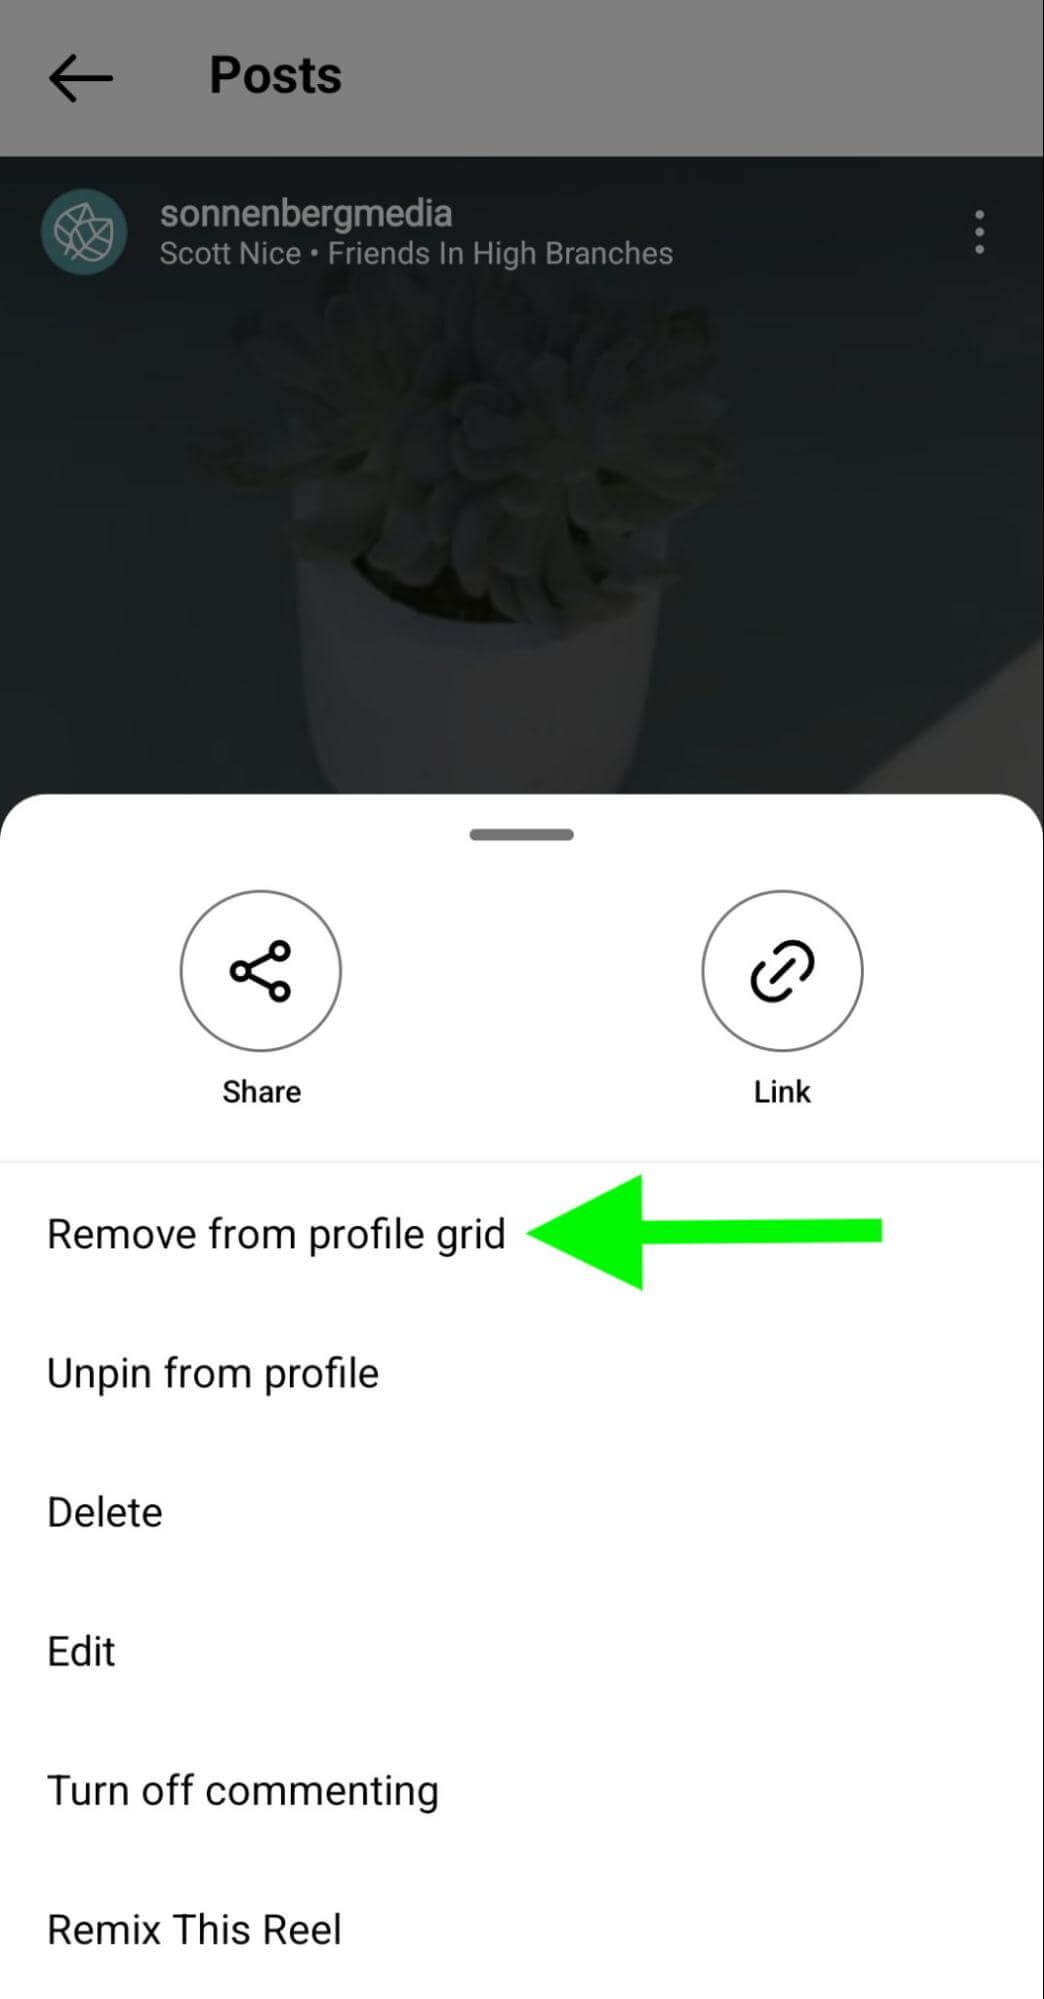 how-to-instagram-unpin-reels-profile-remove-grid-sonnenbergmedia-step-4